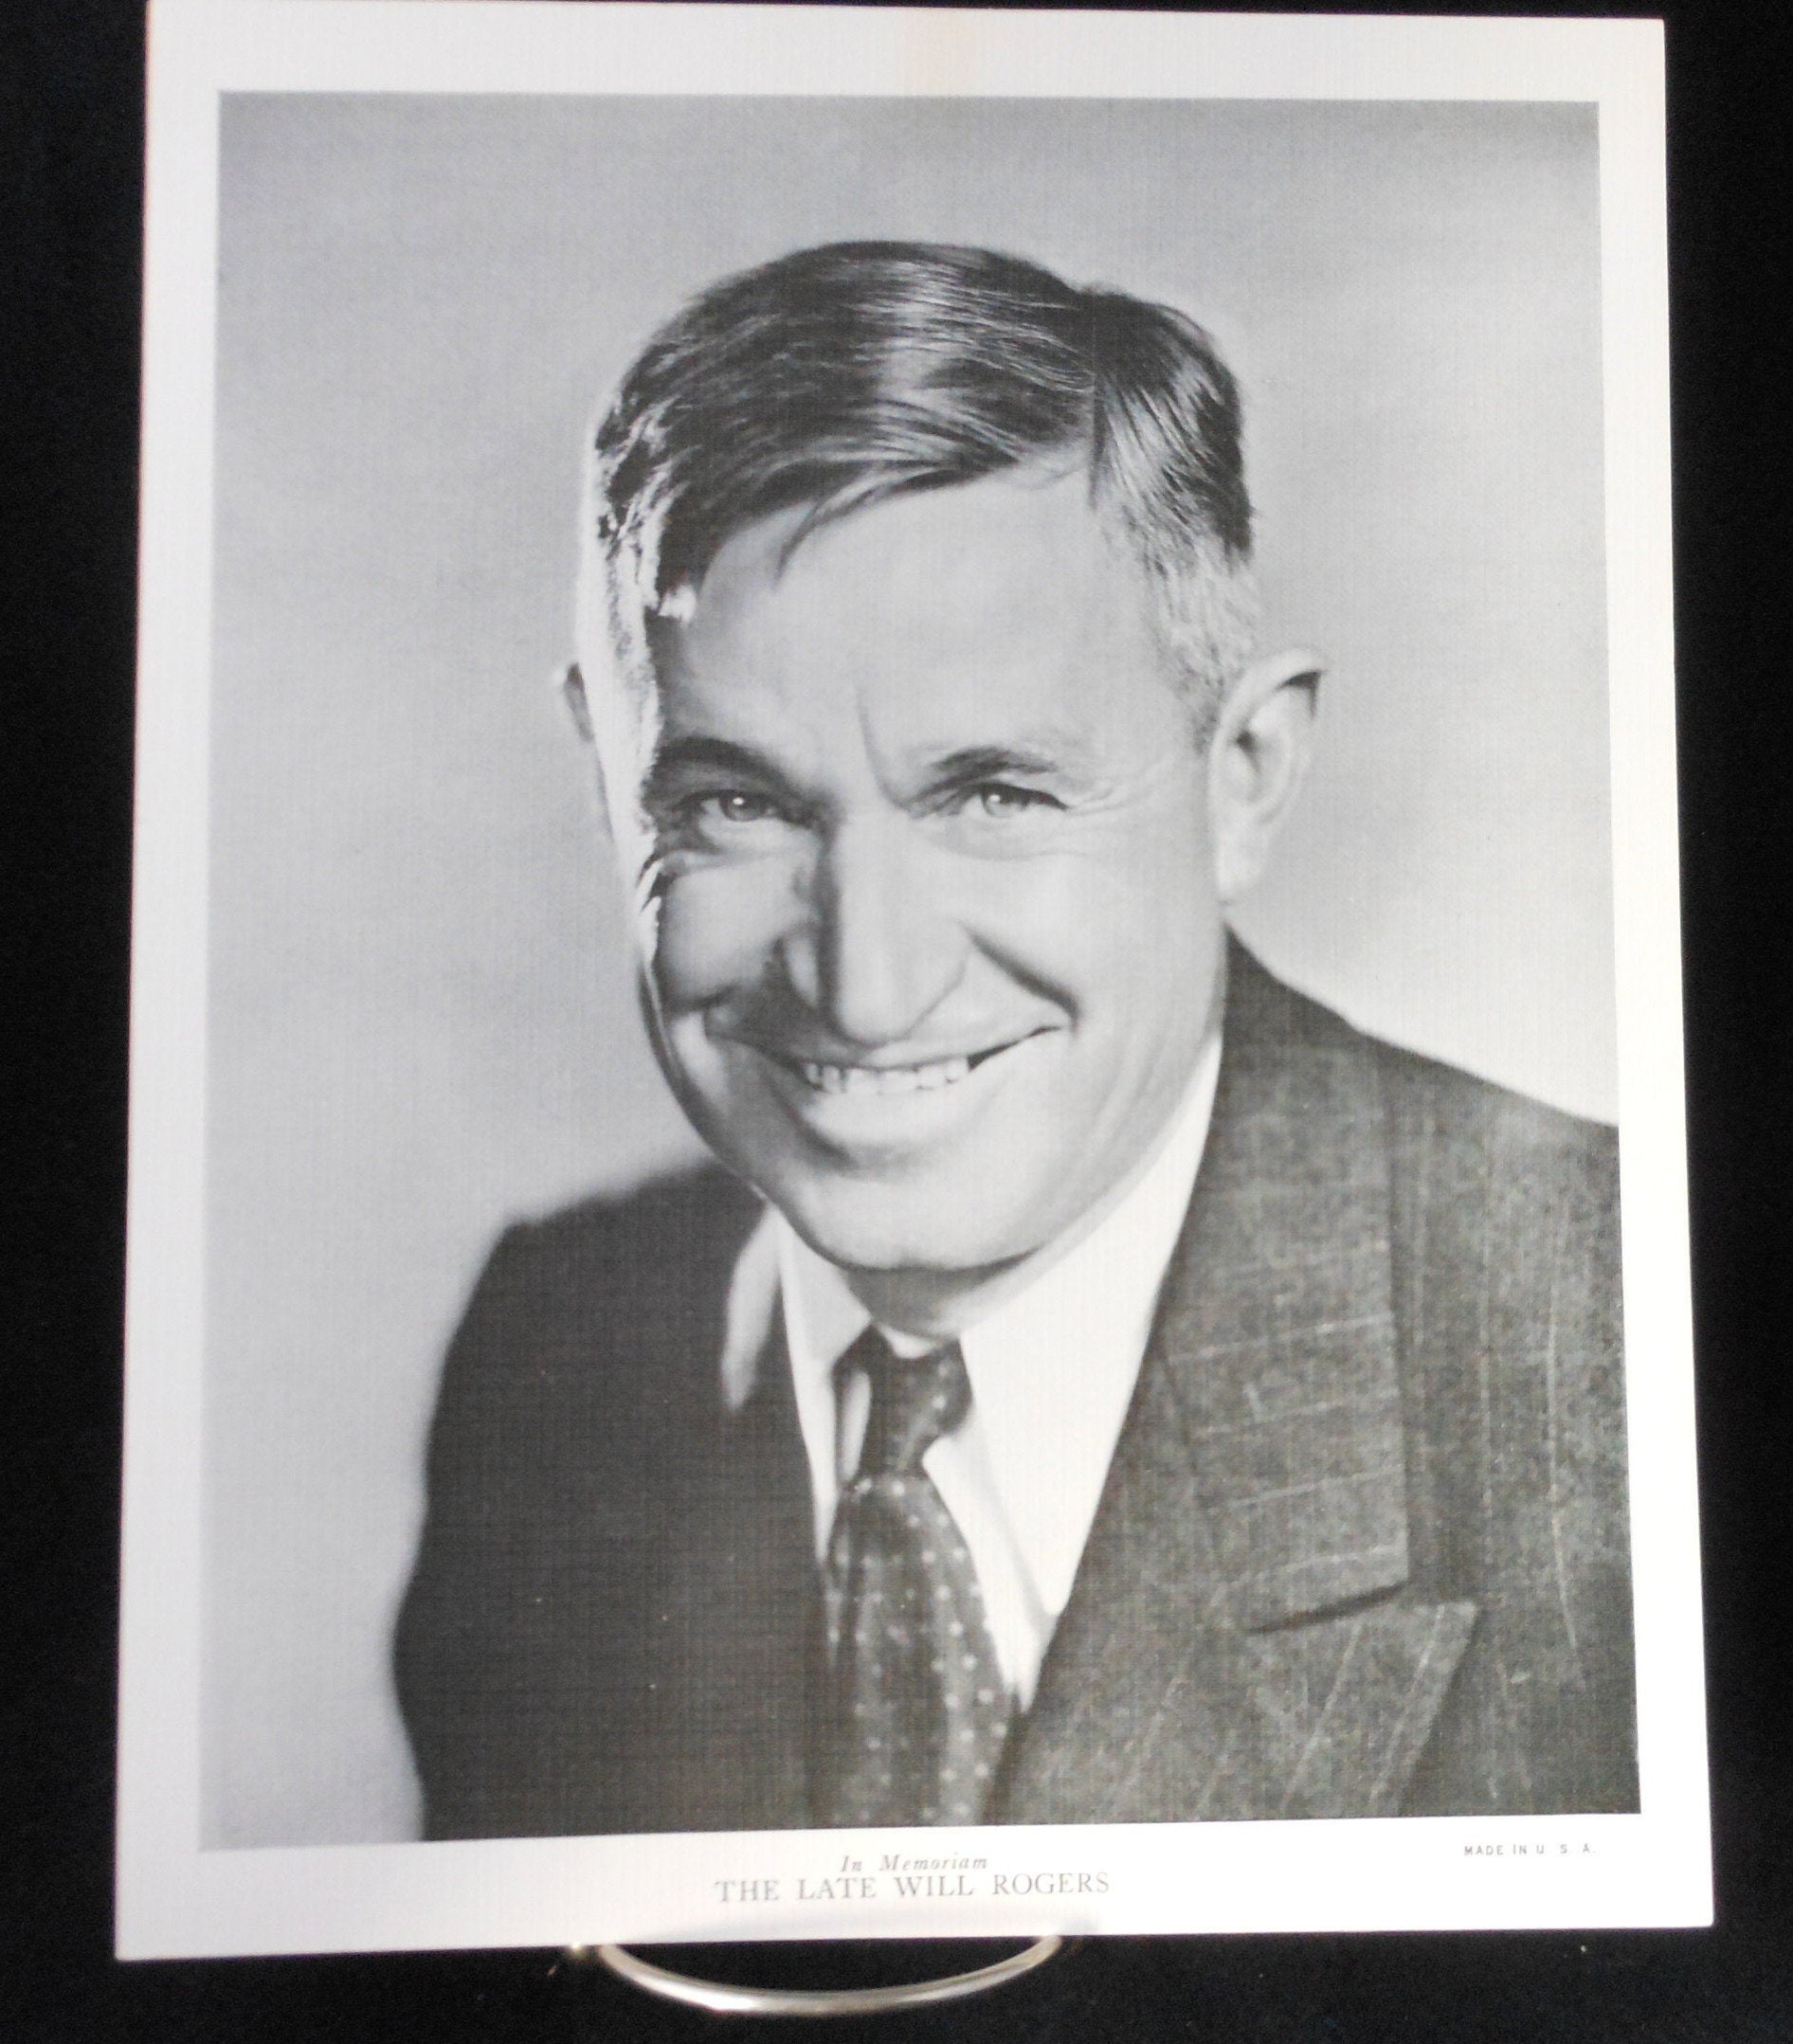 Humorist　Actor　ROGERS　in　1935　Rogers　Etsy　and　American　WILL　Will